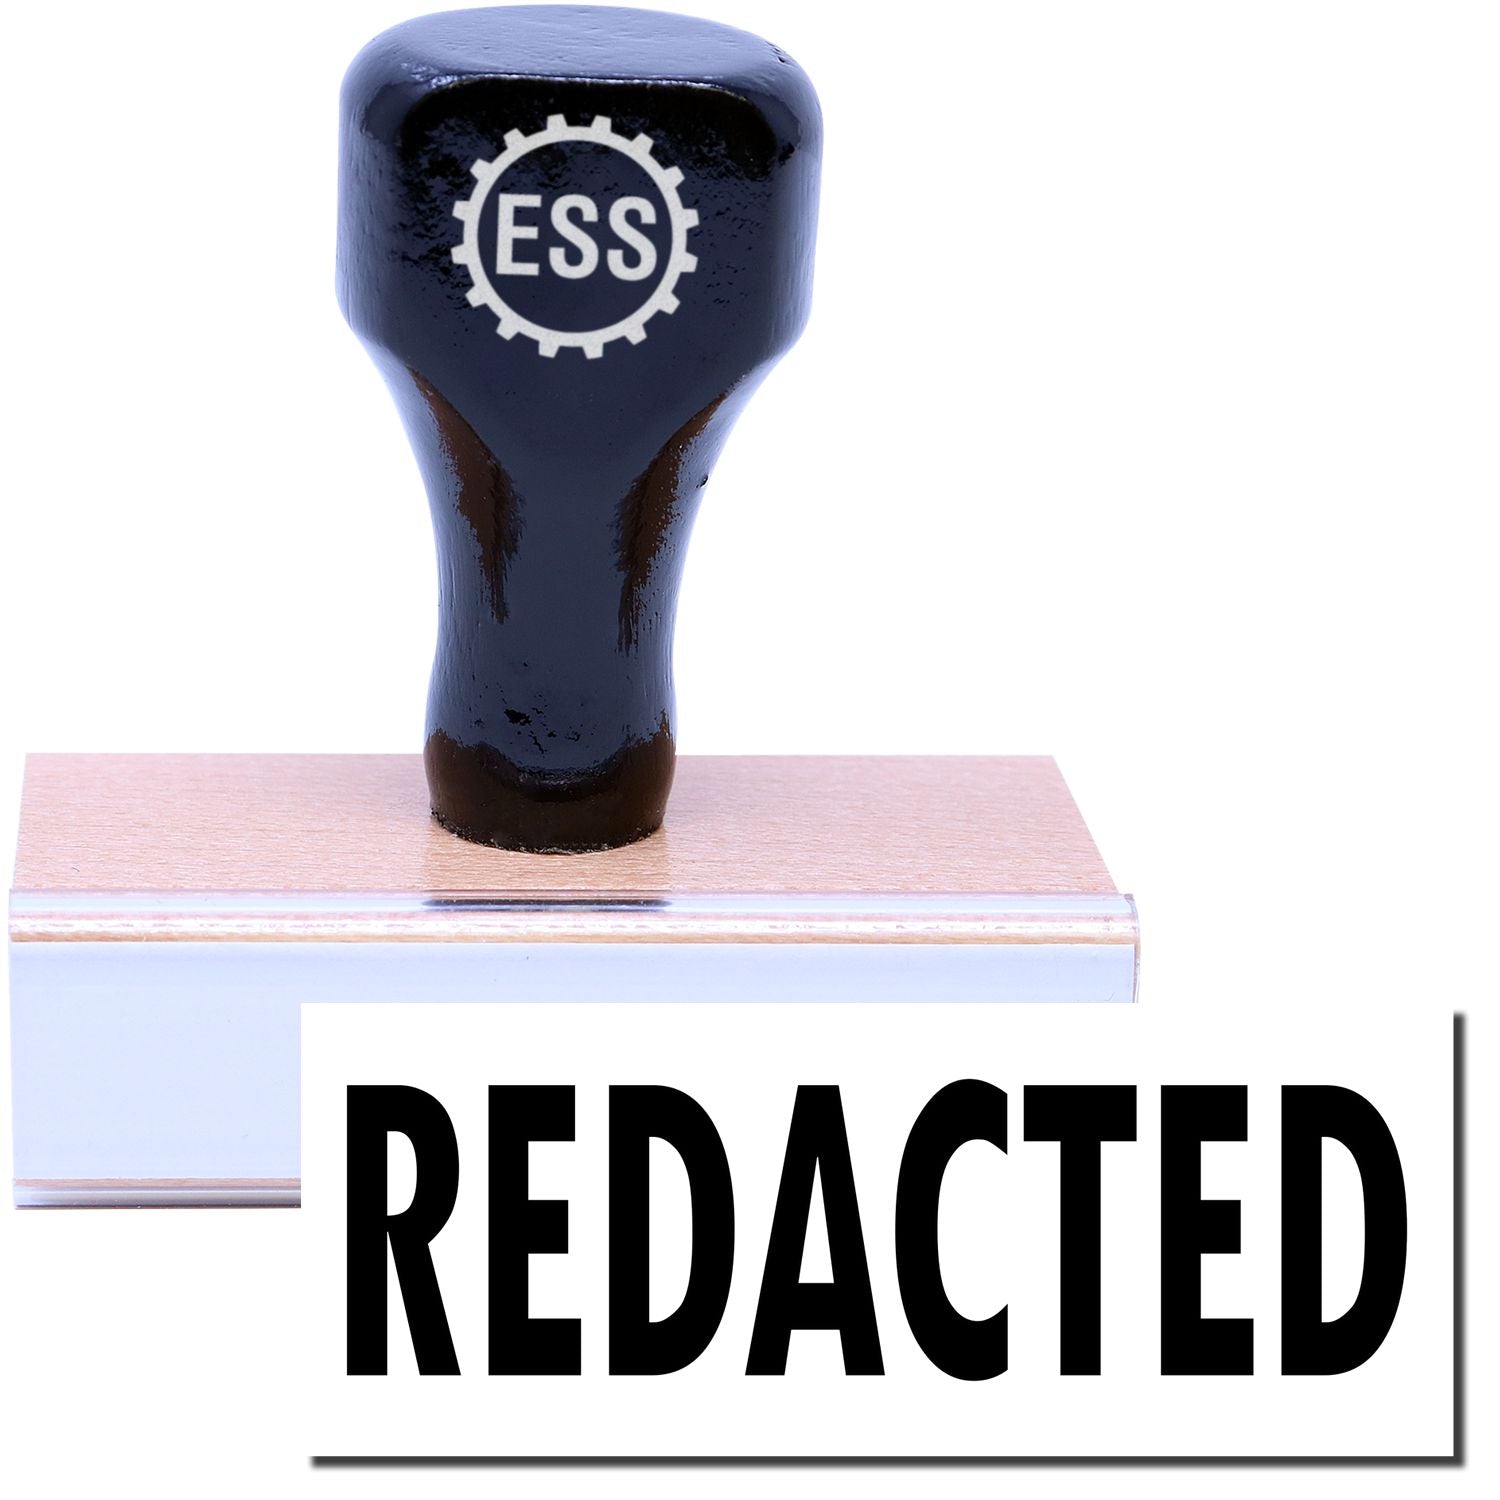 A stock office rubber stamp with a stamped image showing how the text "REDACTED" is displayed after stamping.